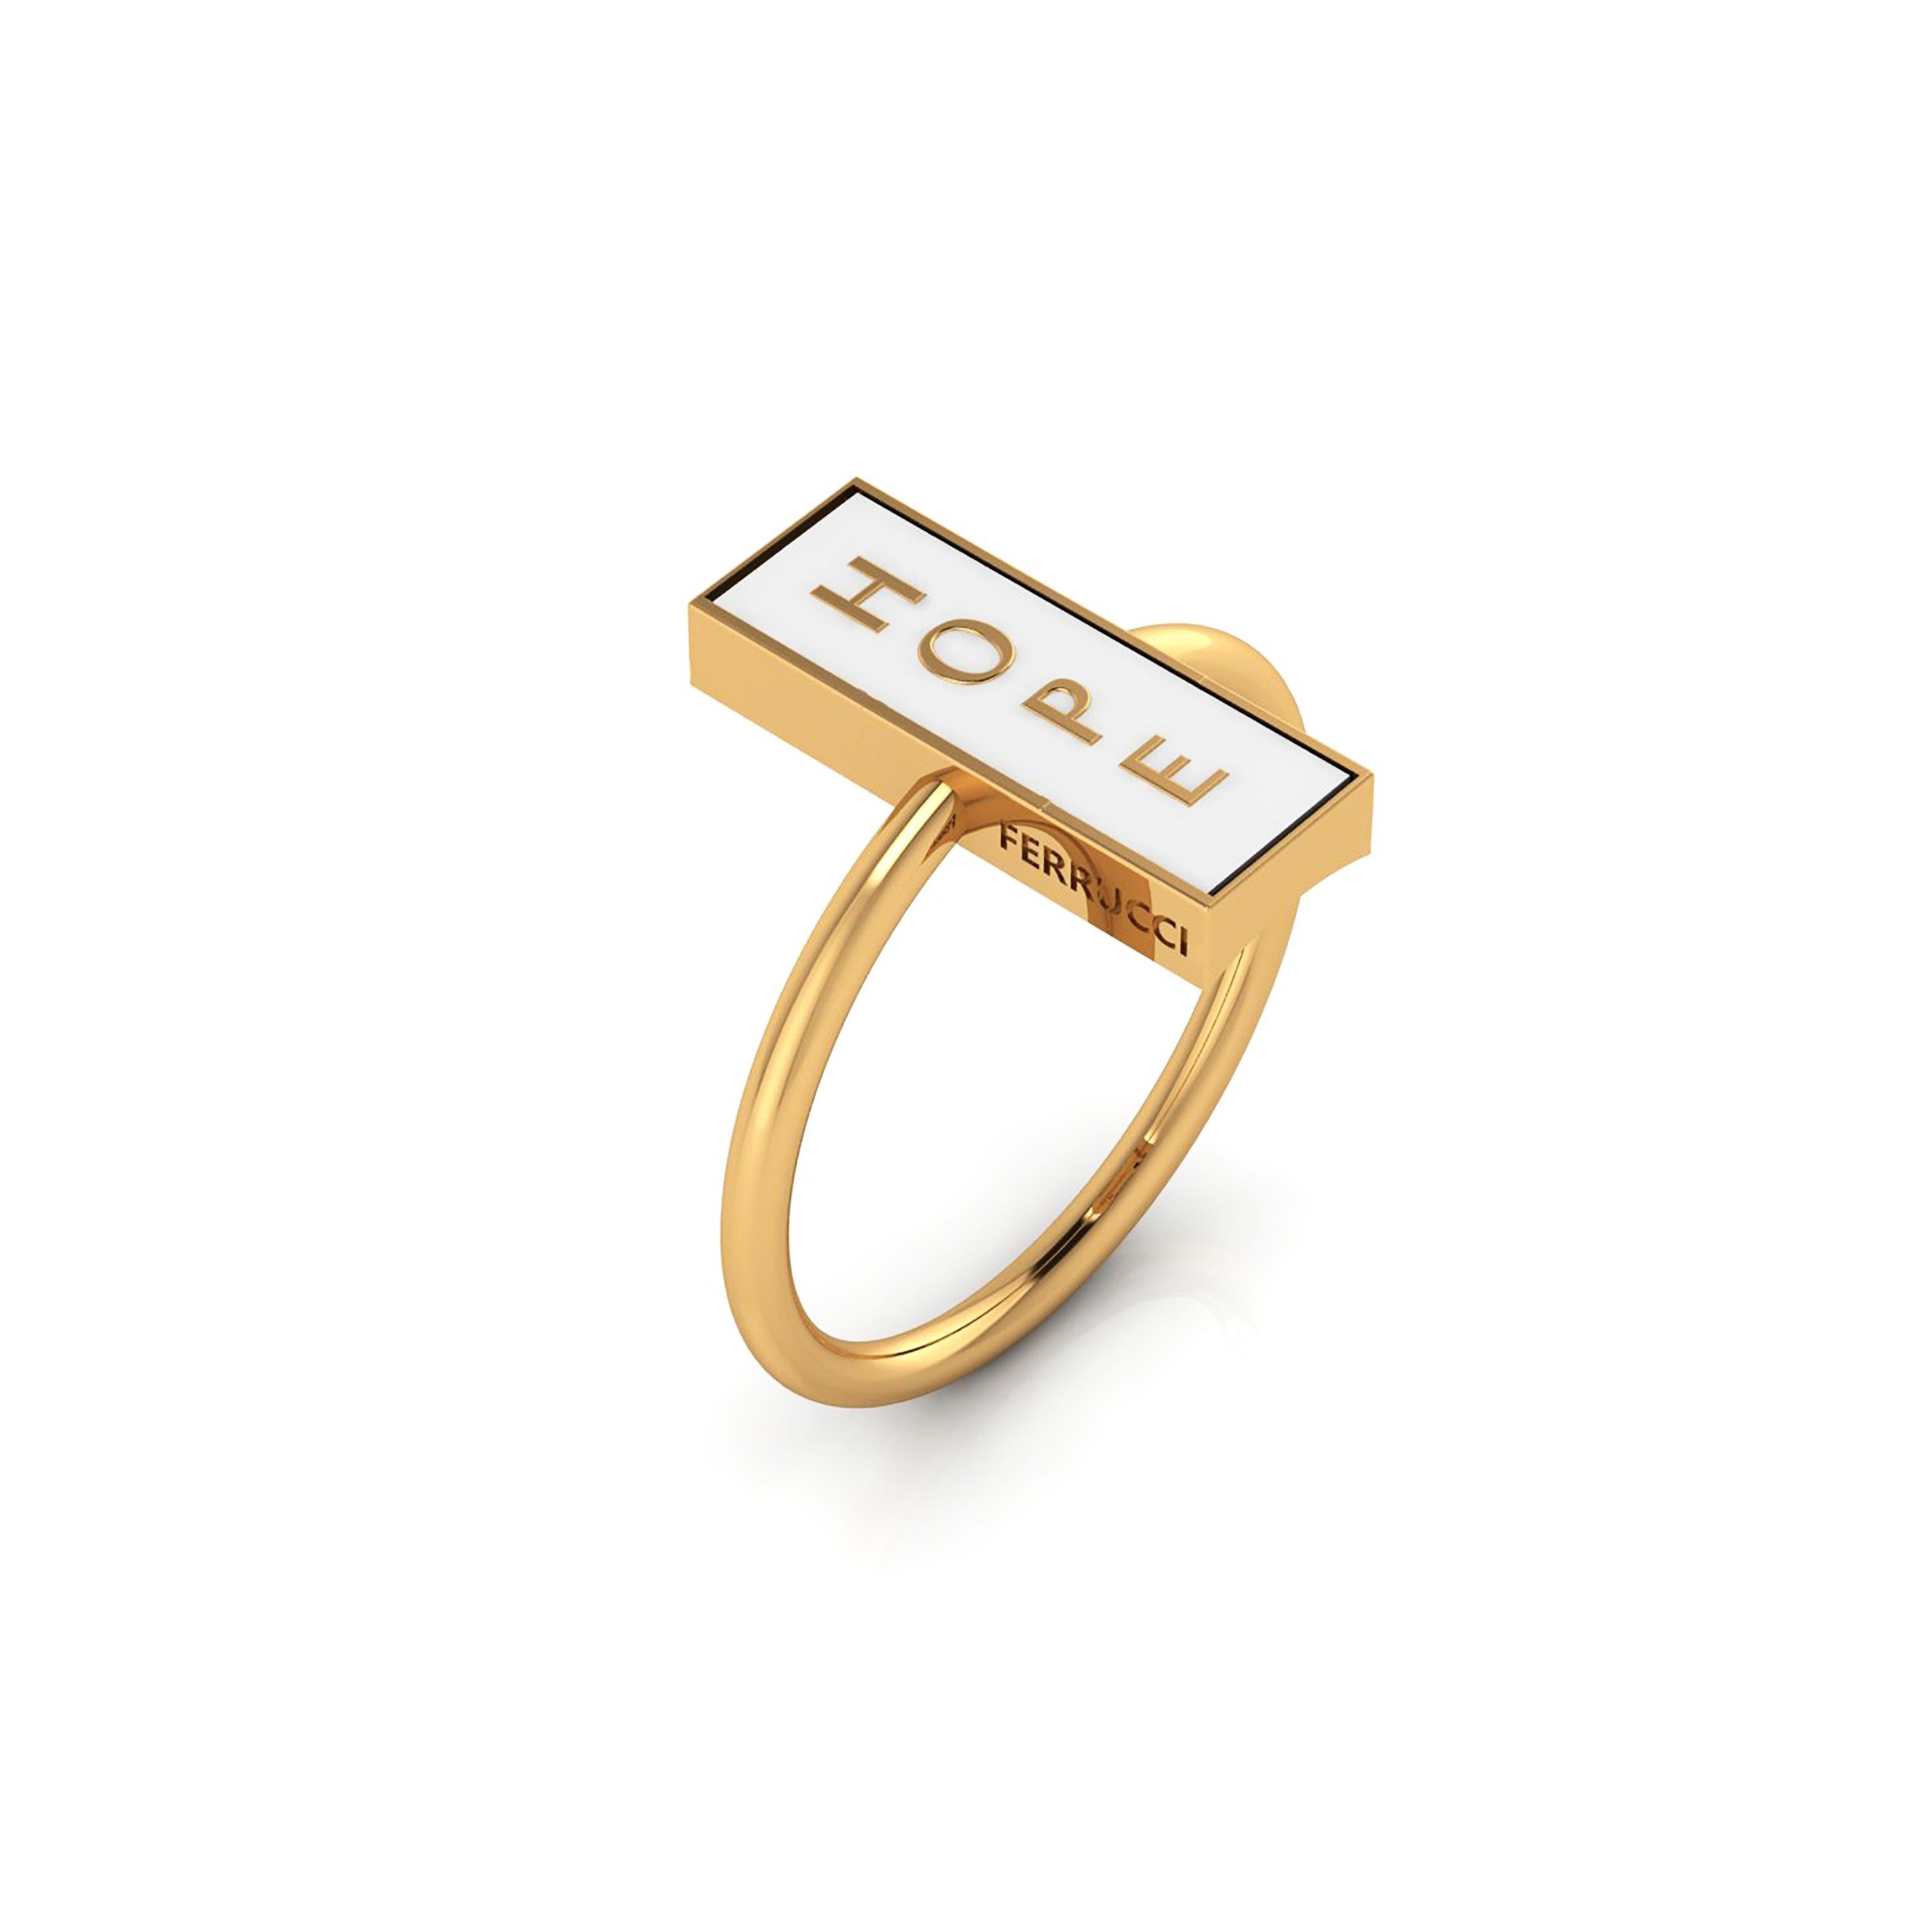 FERRUCCI The Forever Hope white ring, conceived in 18k yellow gold, a new way to bring with you the classy, beautiful 18k yellow gold, everlasting in time, modern and bold shapes combined to create everlasting Hope
Size 6, complimentary sizing and